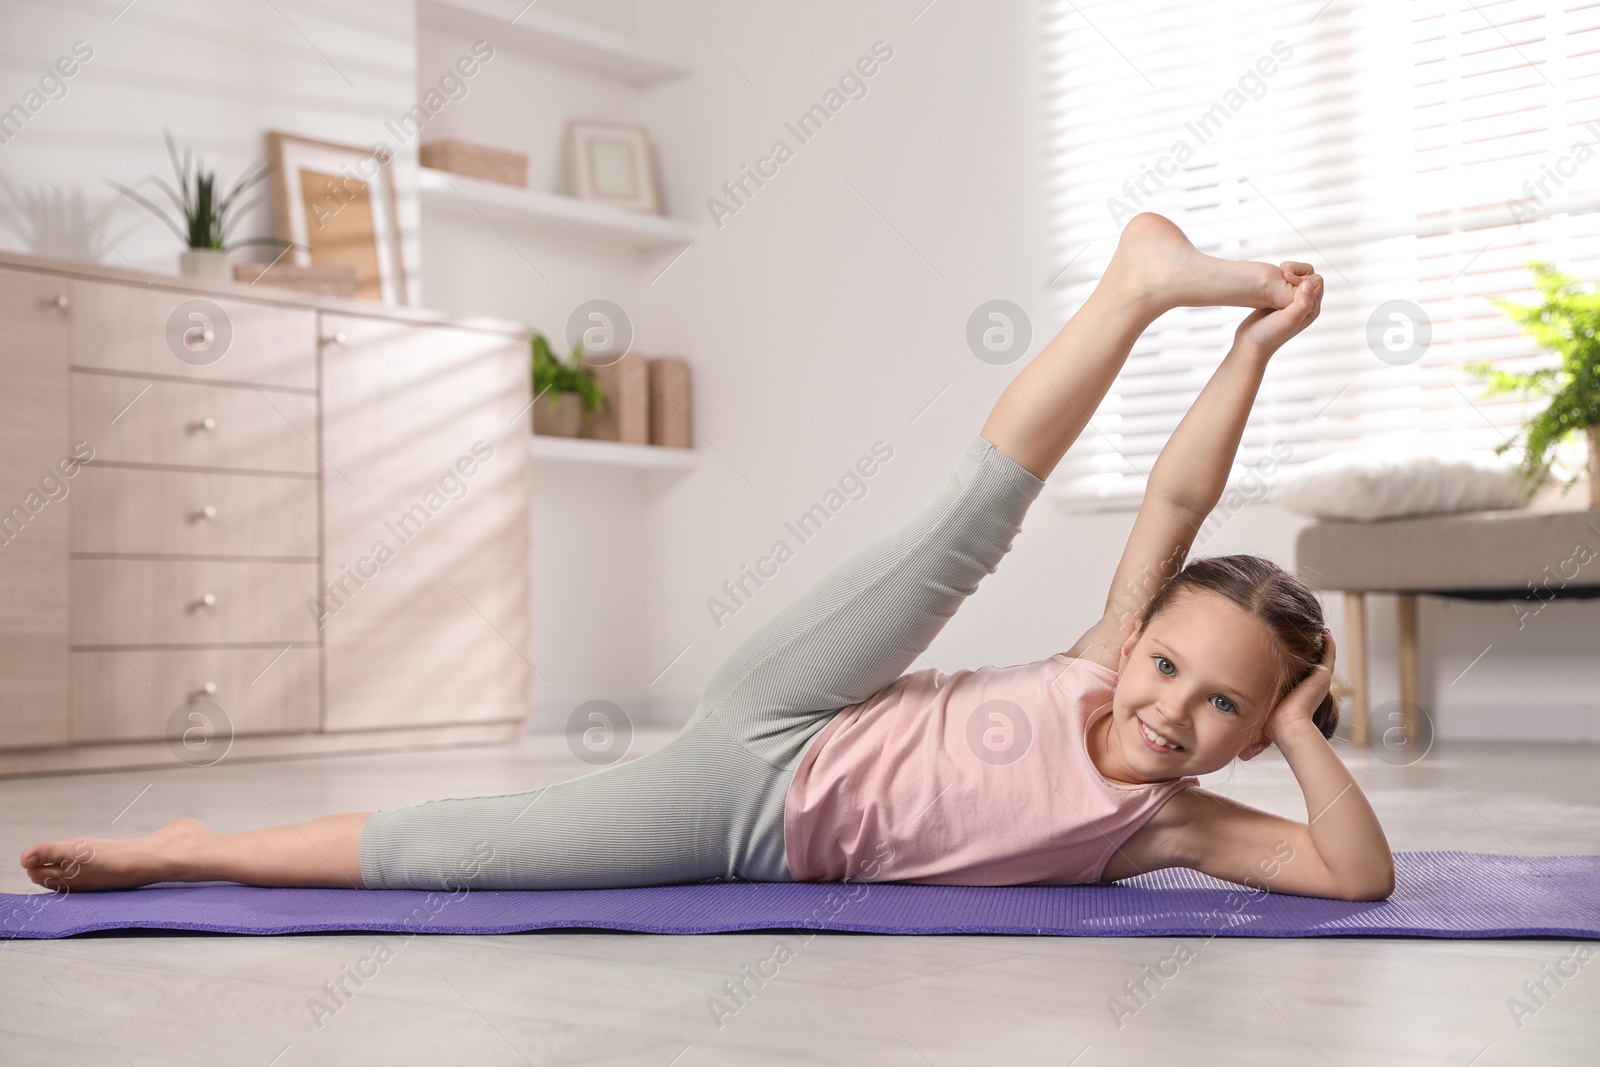 Photo of Cute little girl stretching herself on mat at home